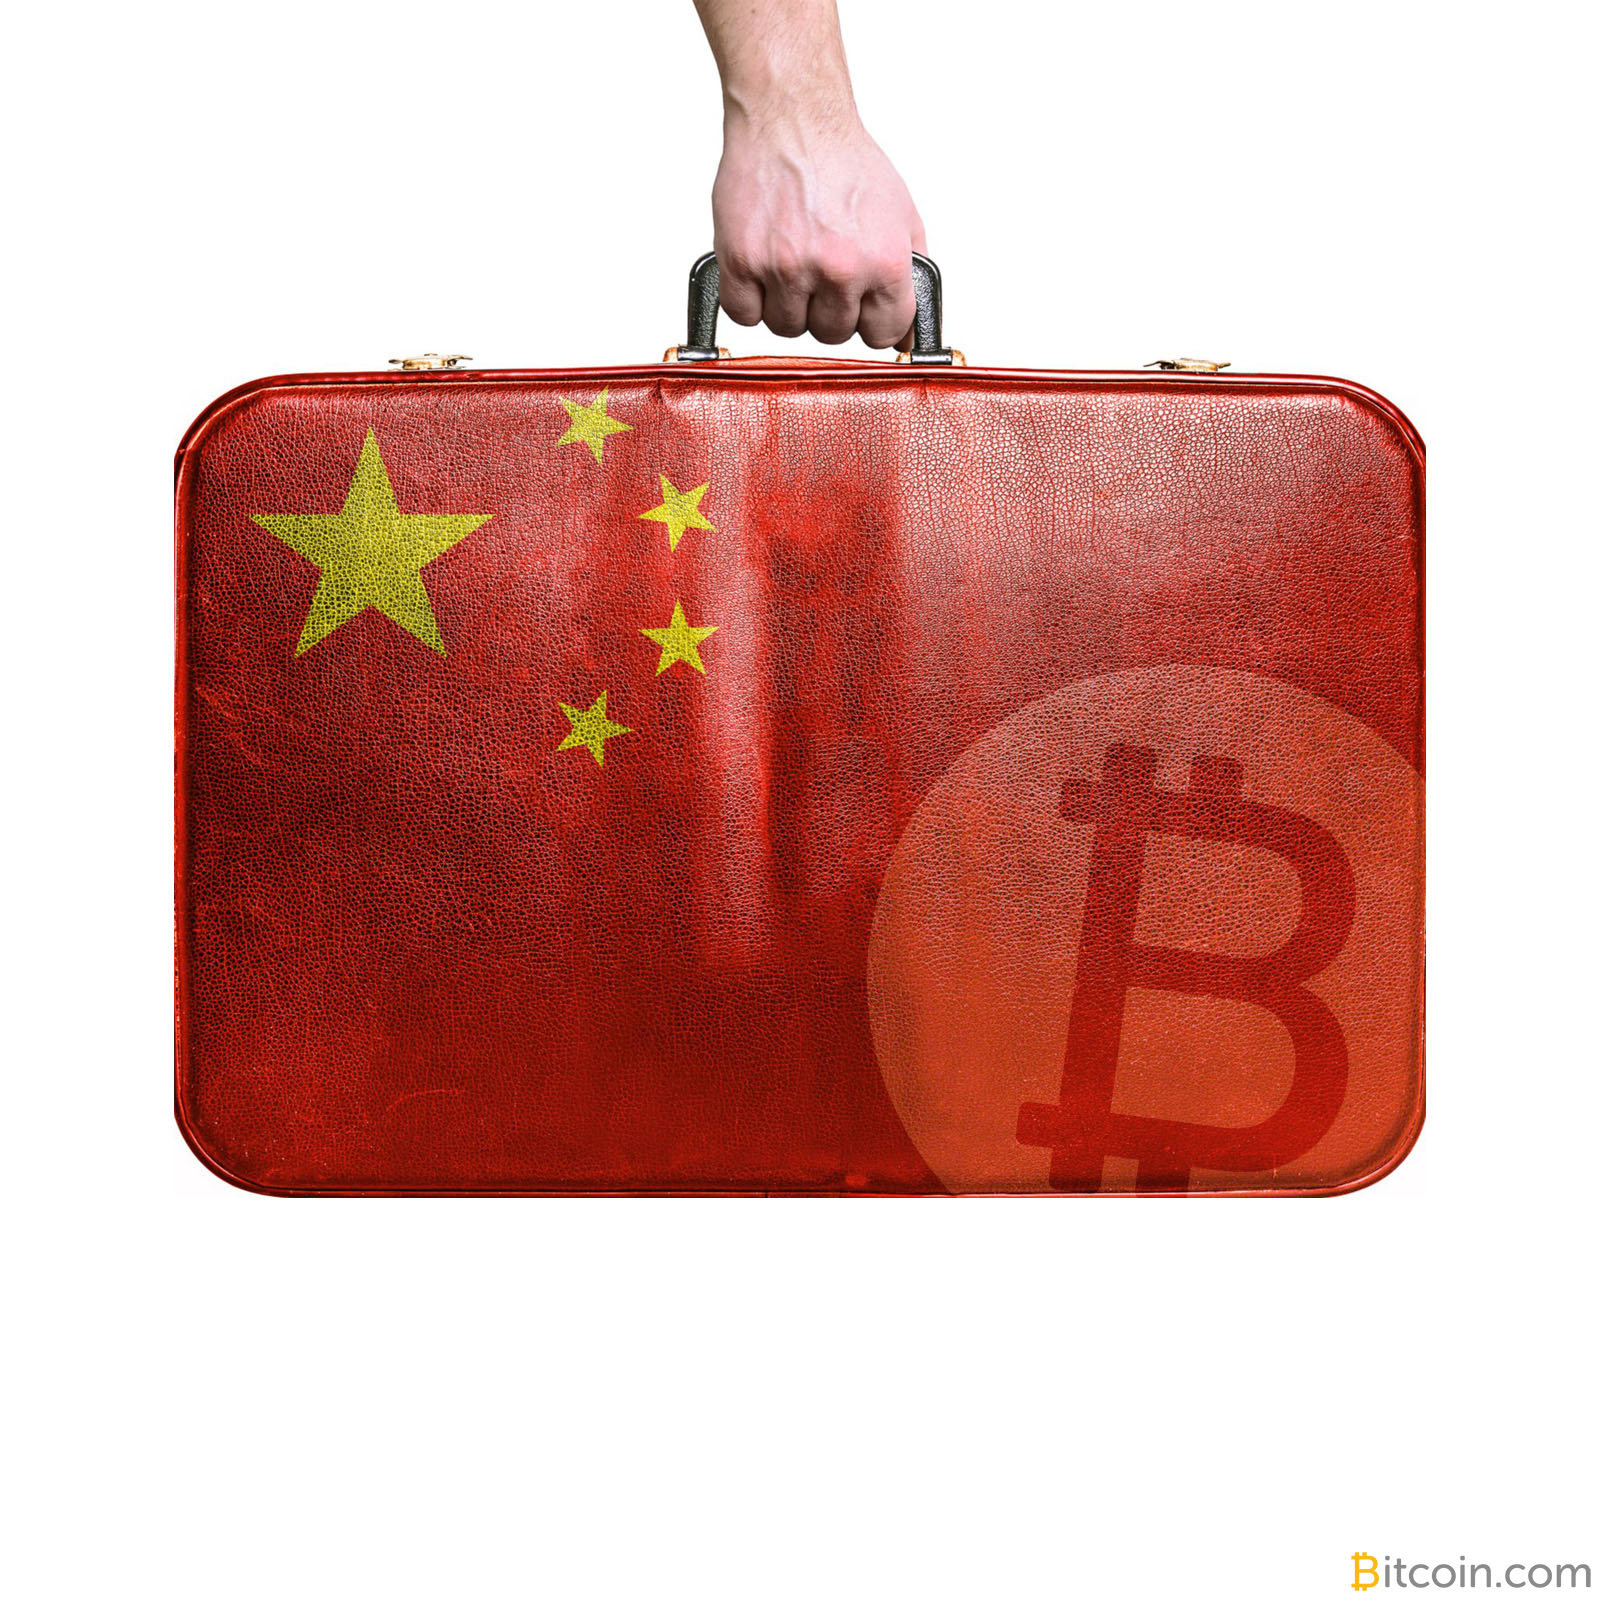 Chinese Exchange to Launch Platform Based Outside of the Country